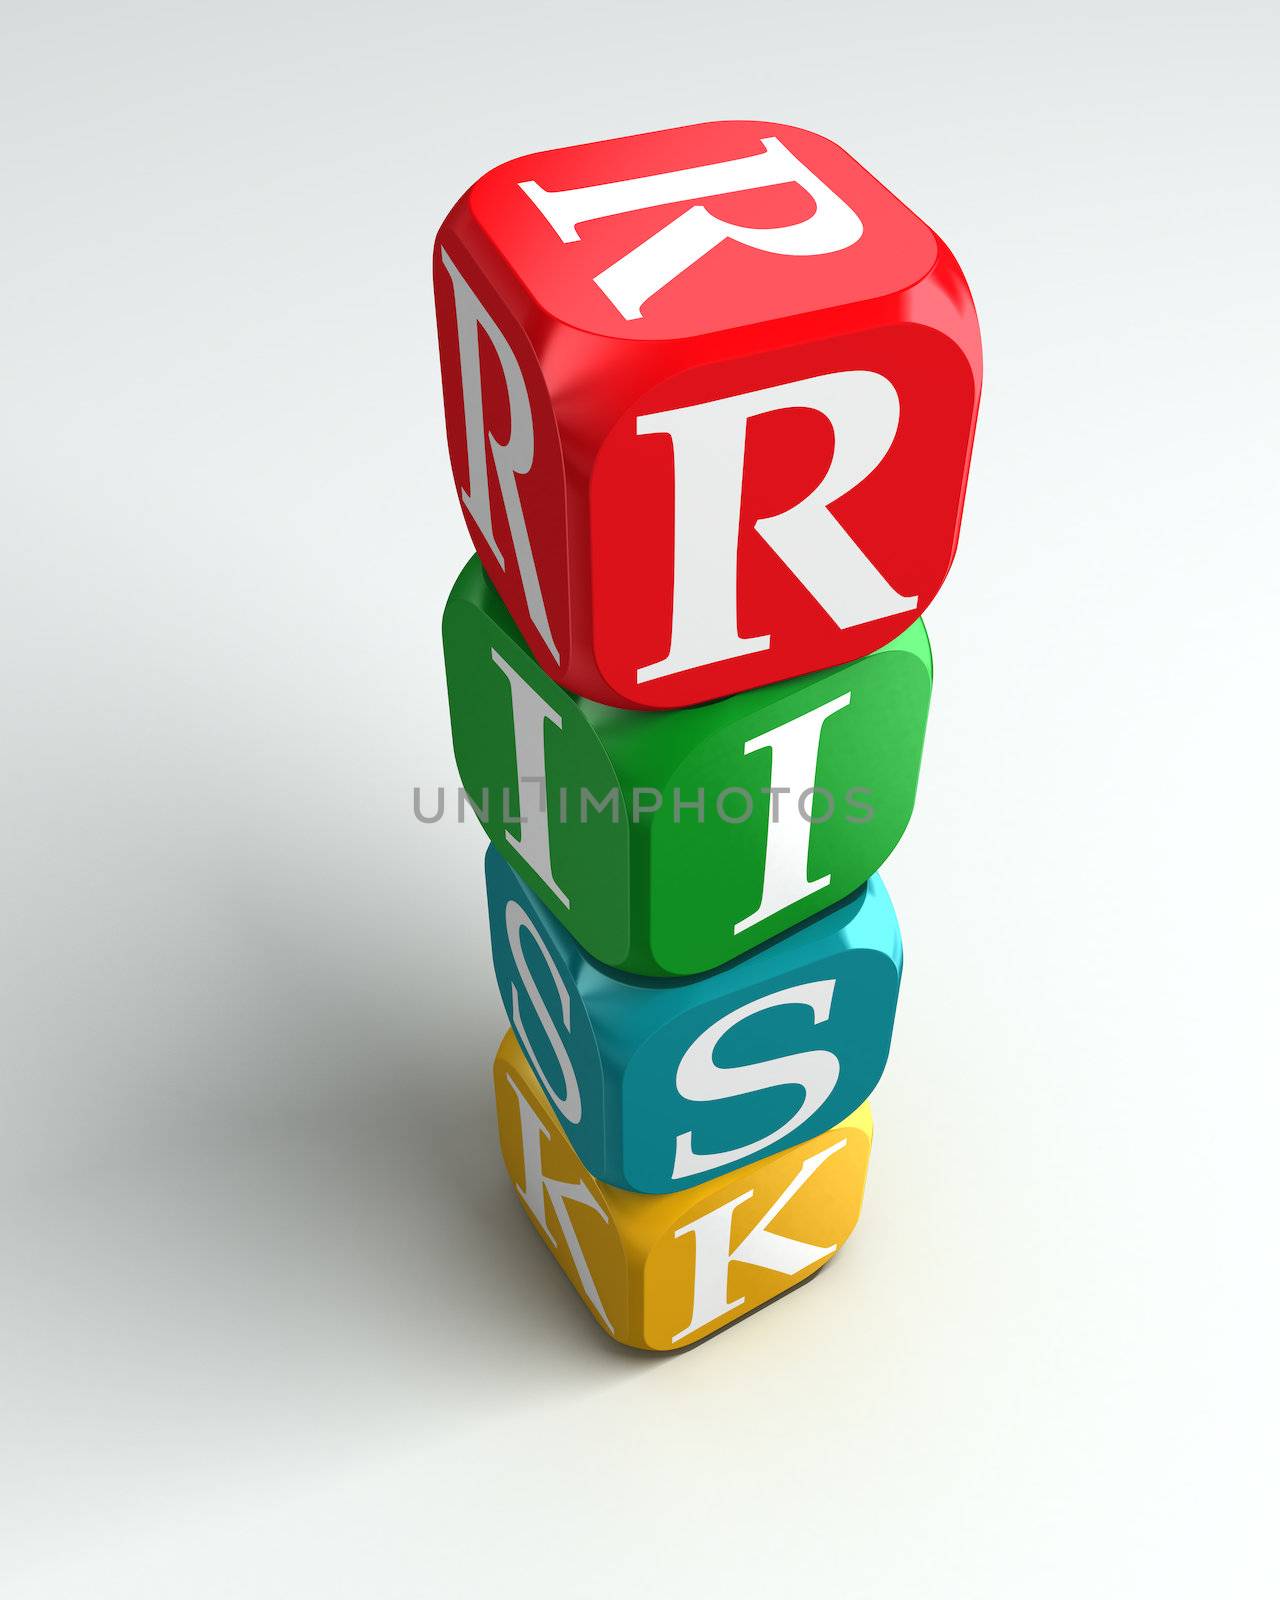 quality 3d colorful buzzword on white background